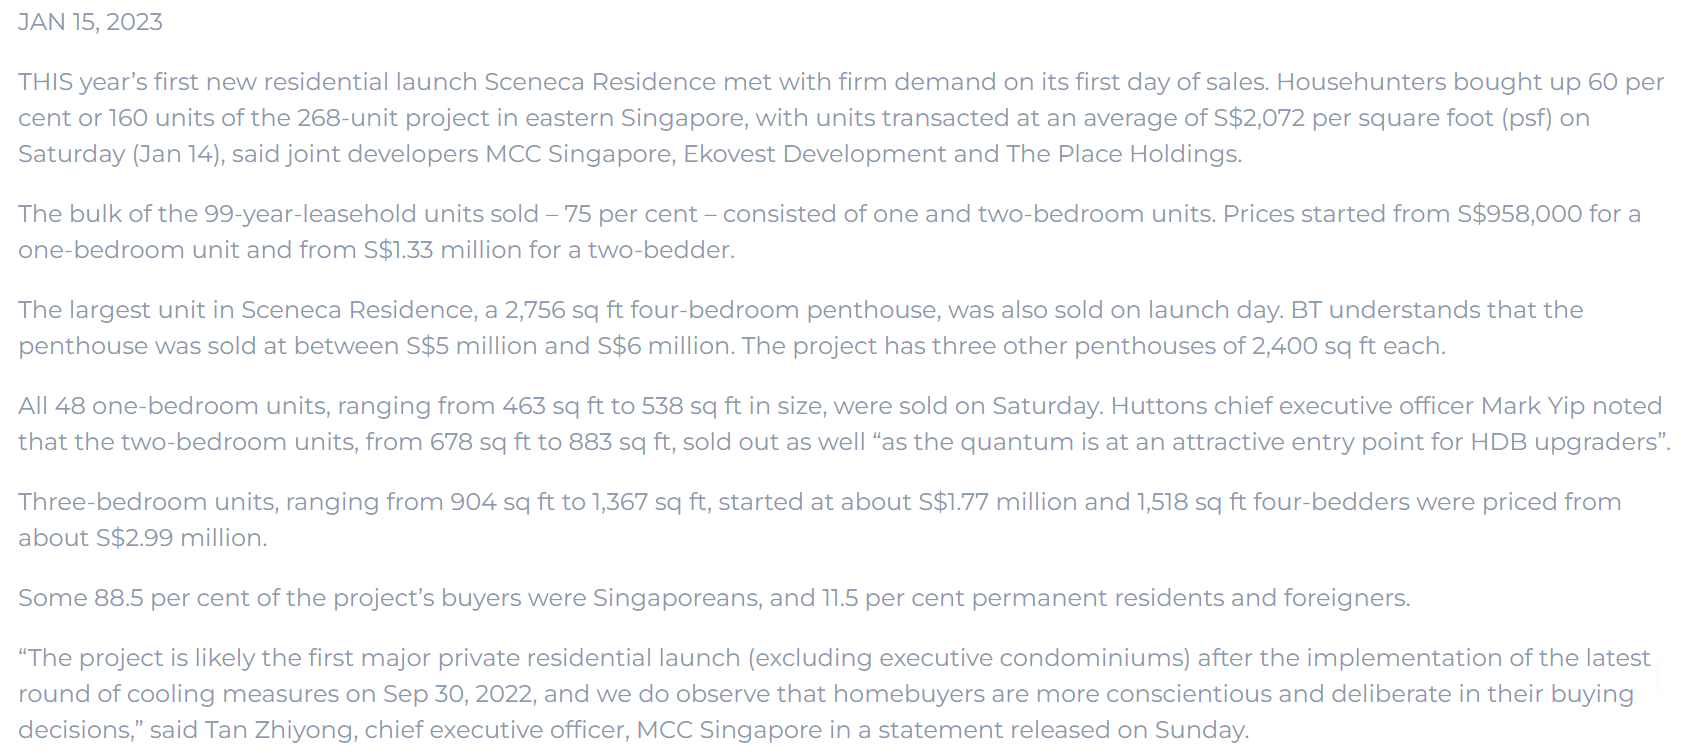 sceneca-residence-sells-60-of-268-units-on-launch-day-at-average-s2072-psf-1